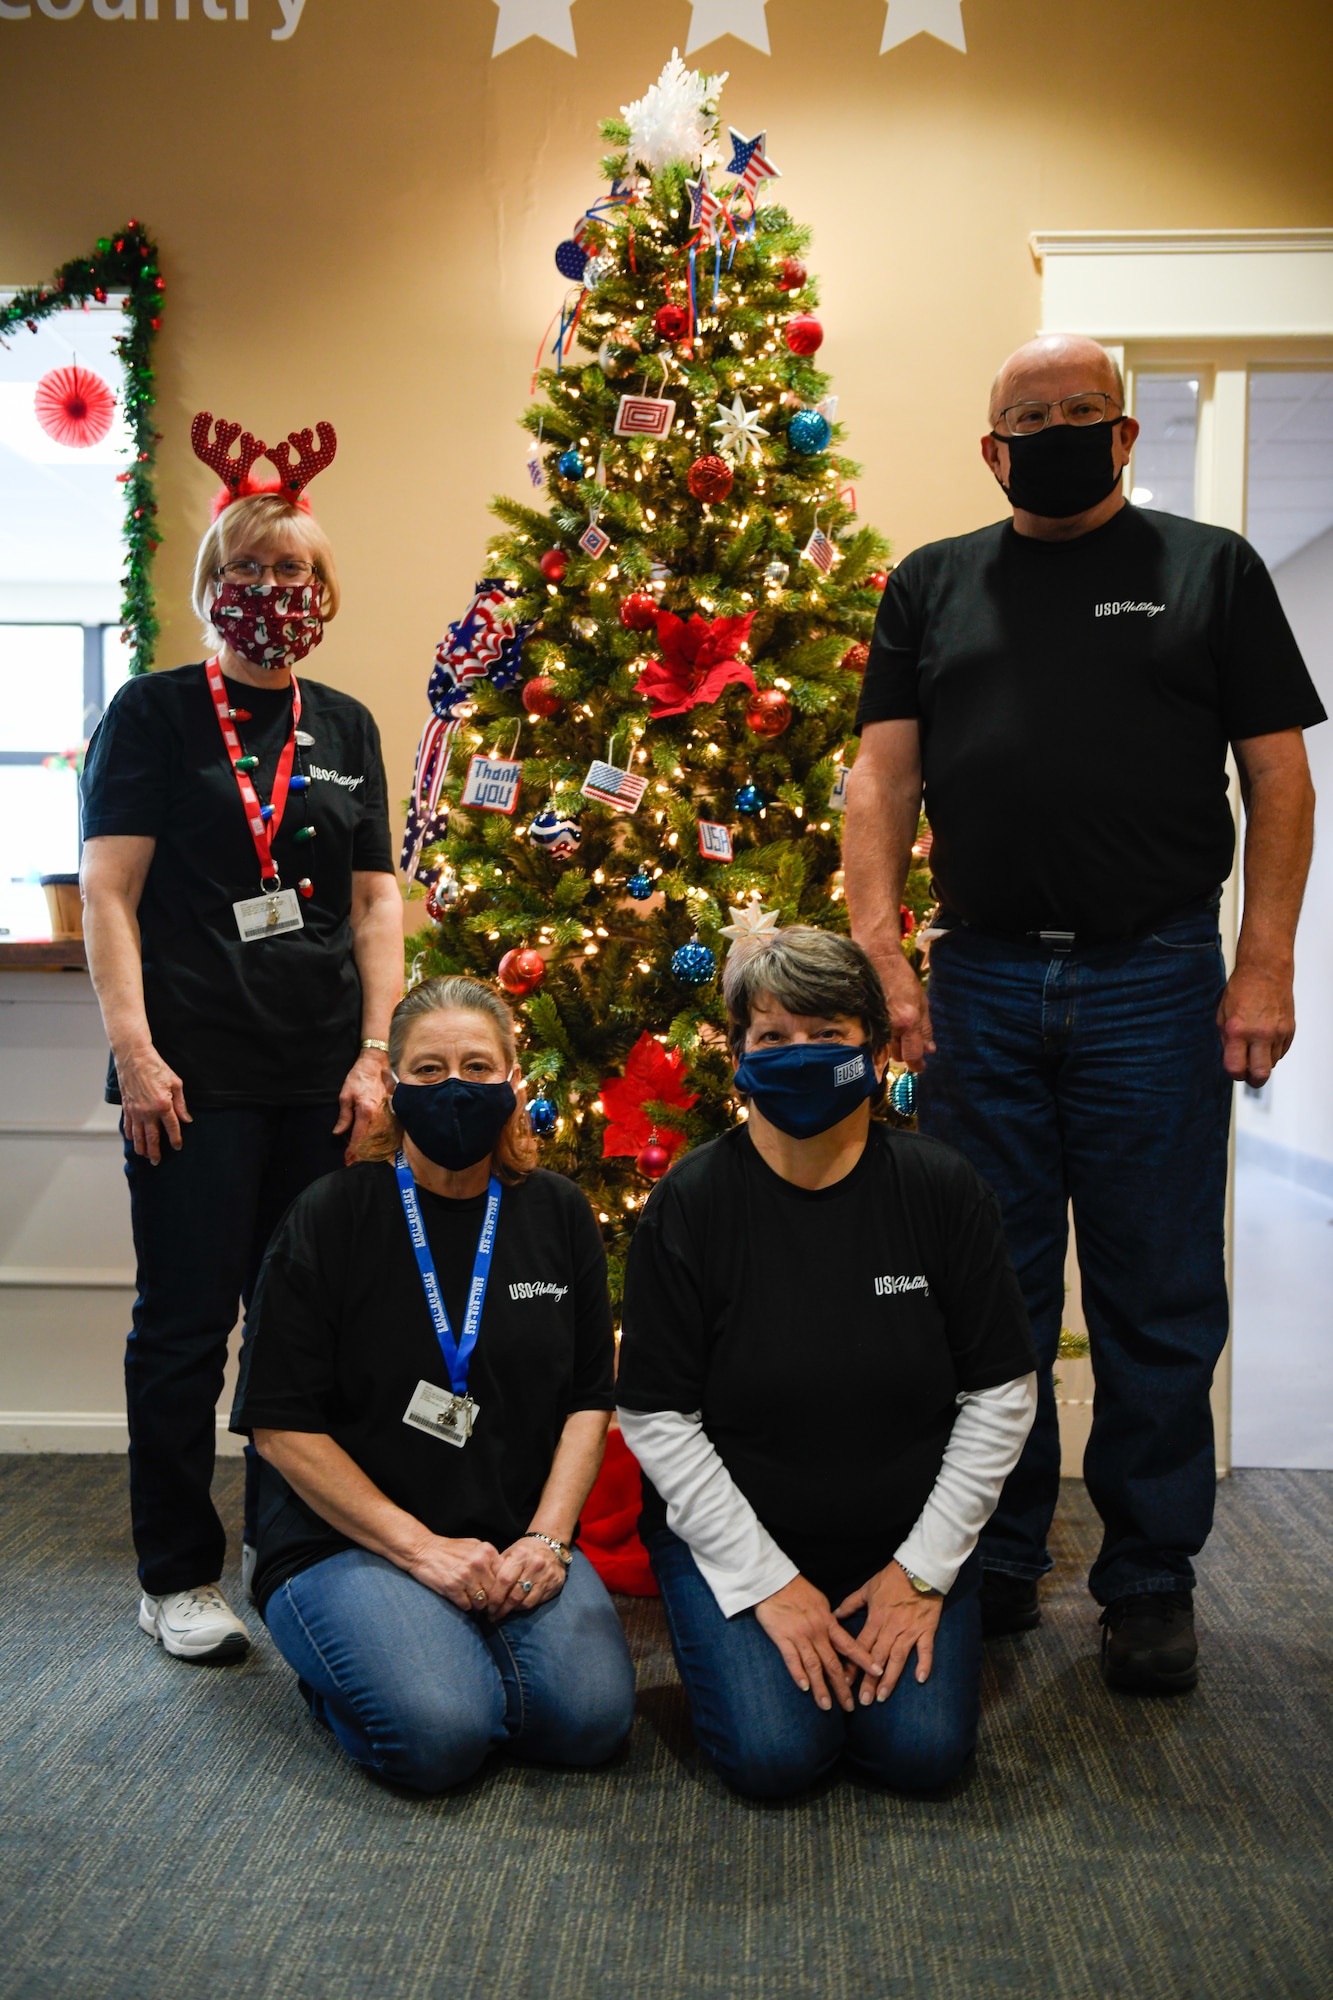 Volunteers of the USO of Northern Ohio pose in front of a Christmas tree during the Winter Wonderland event, Dec. 5, 2021, here.